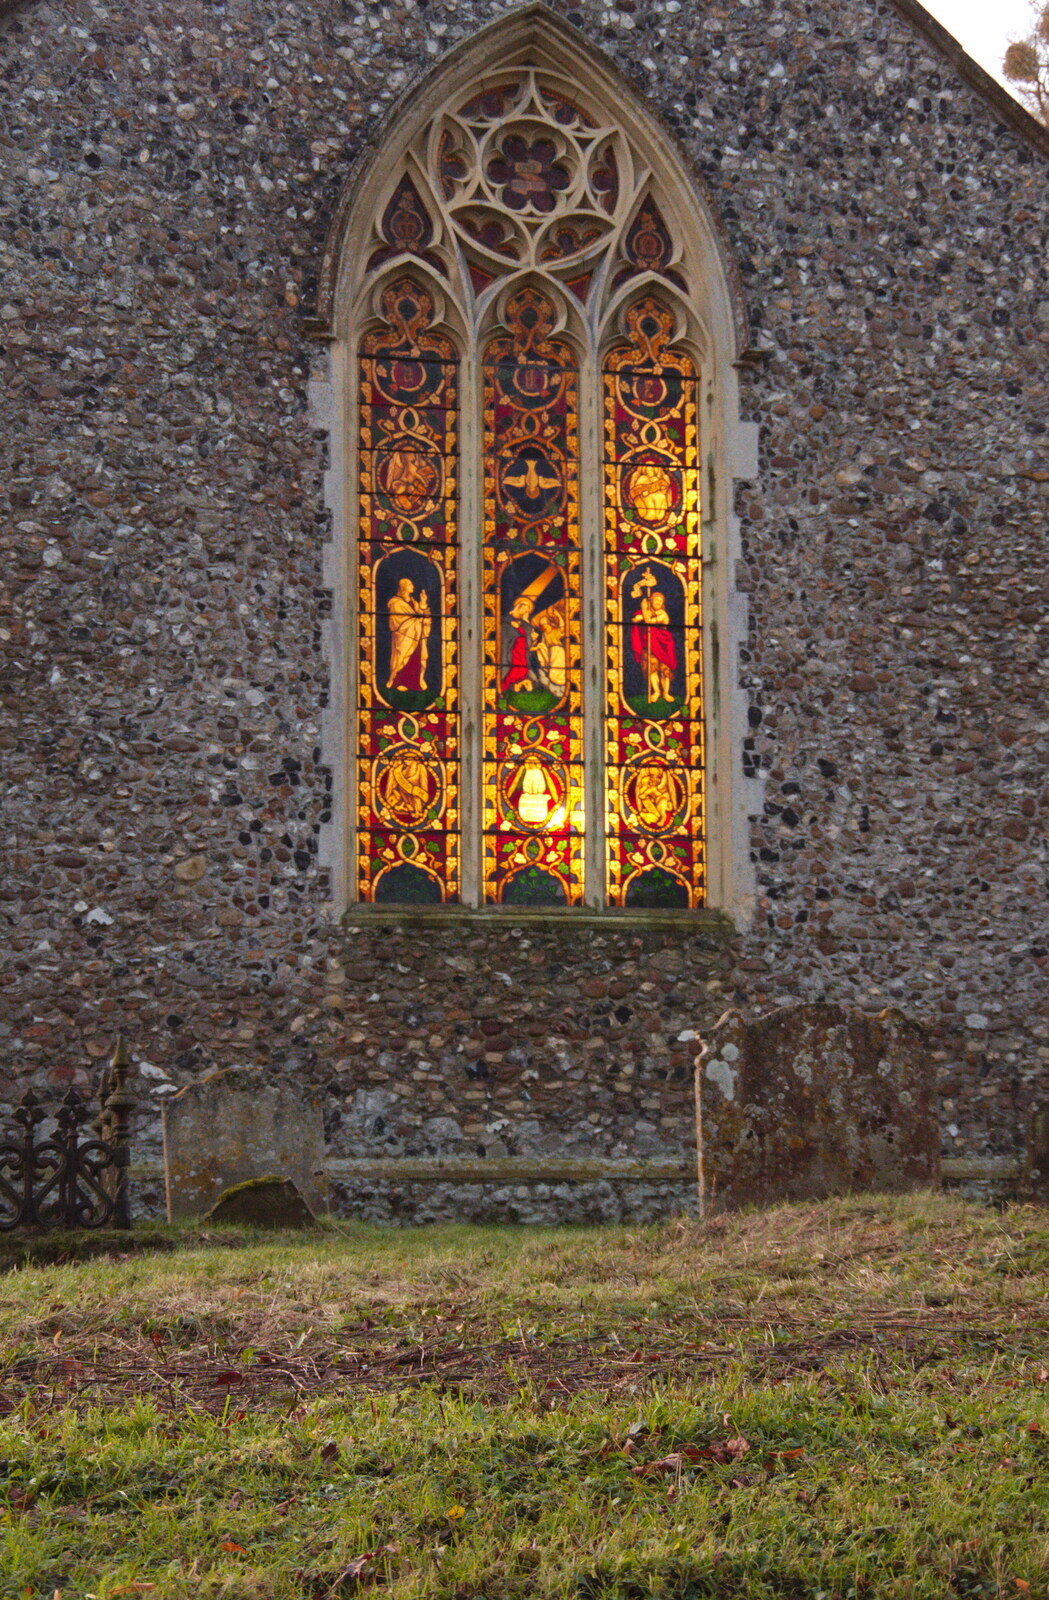 Stained glass at the end of the nave from The GSB at Thornham Magna and Yaxley Cherry Tree, Suffolk - 15th December 2019